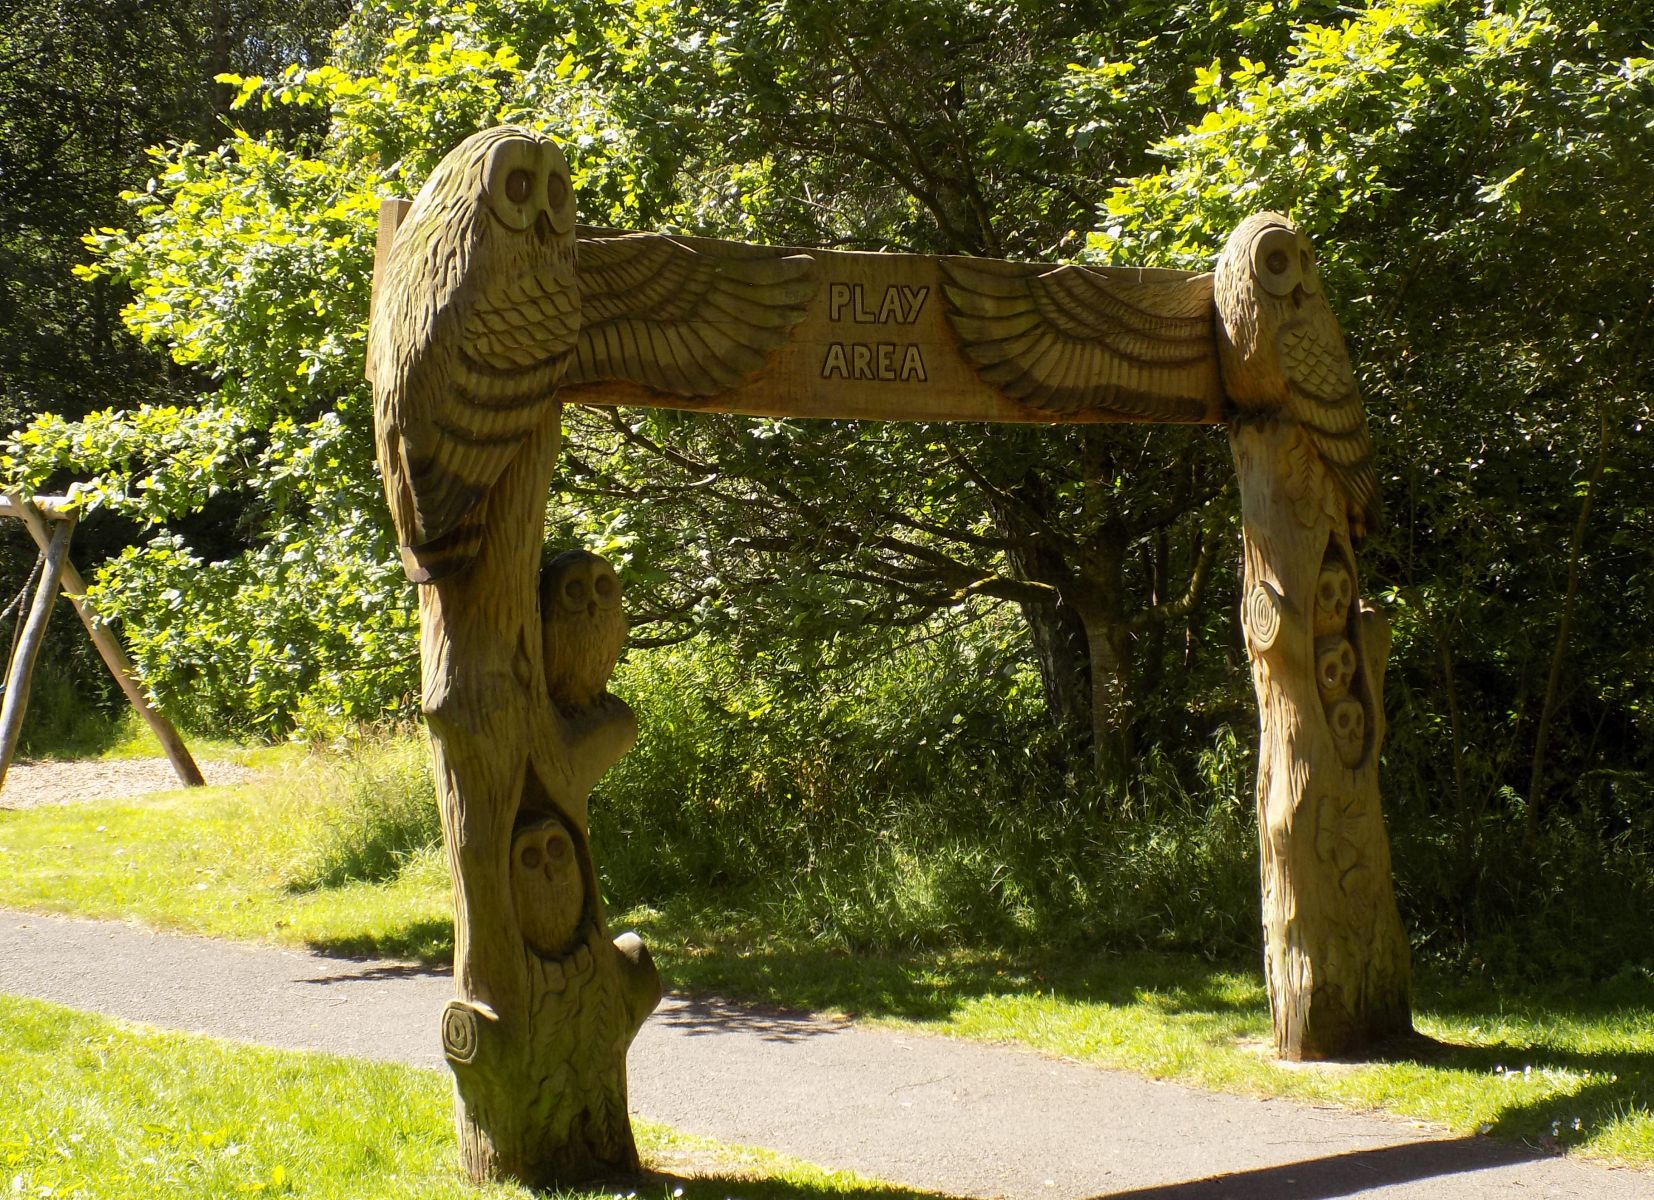 Archway to Play Area in Plean Park